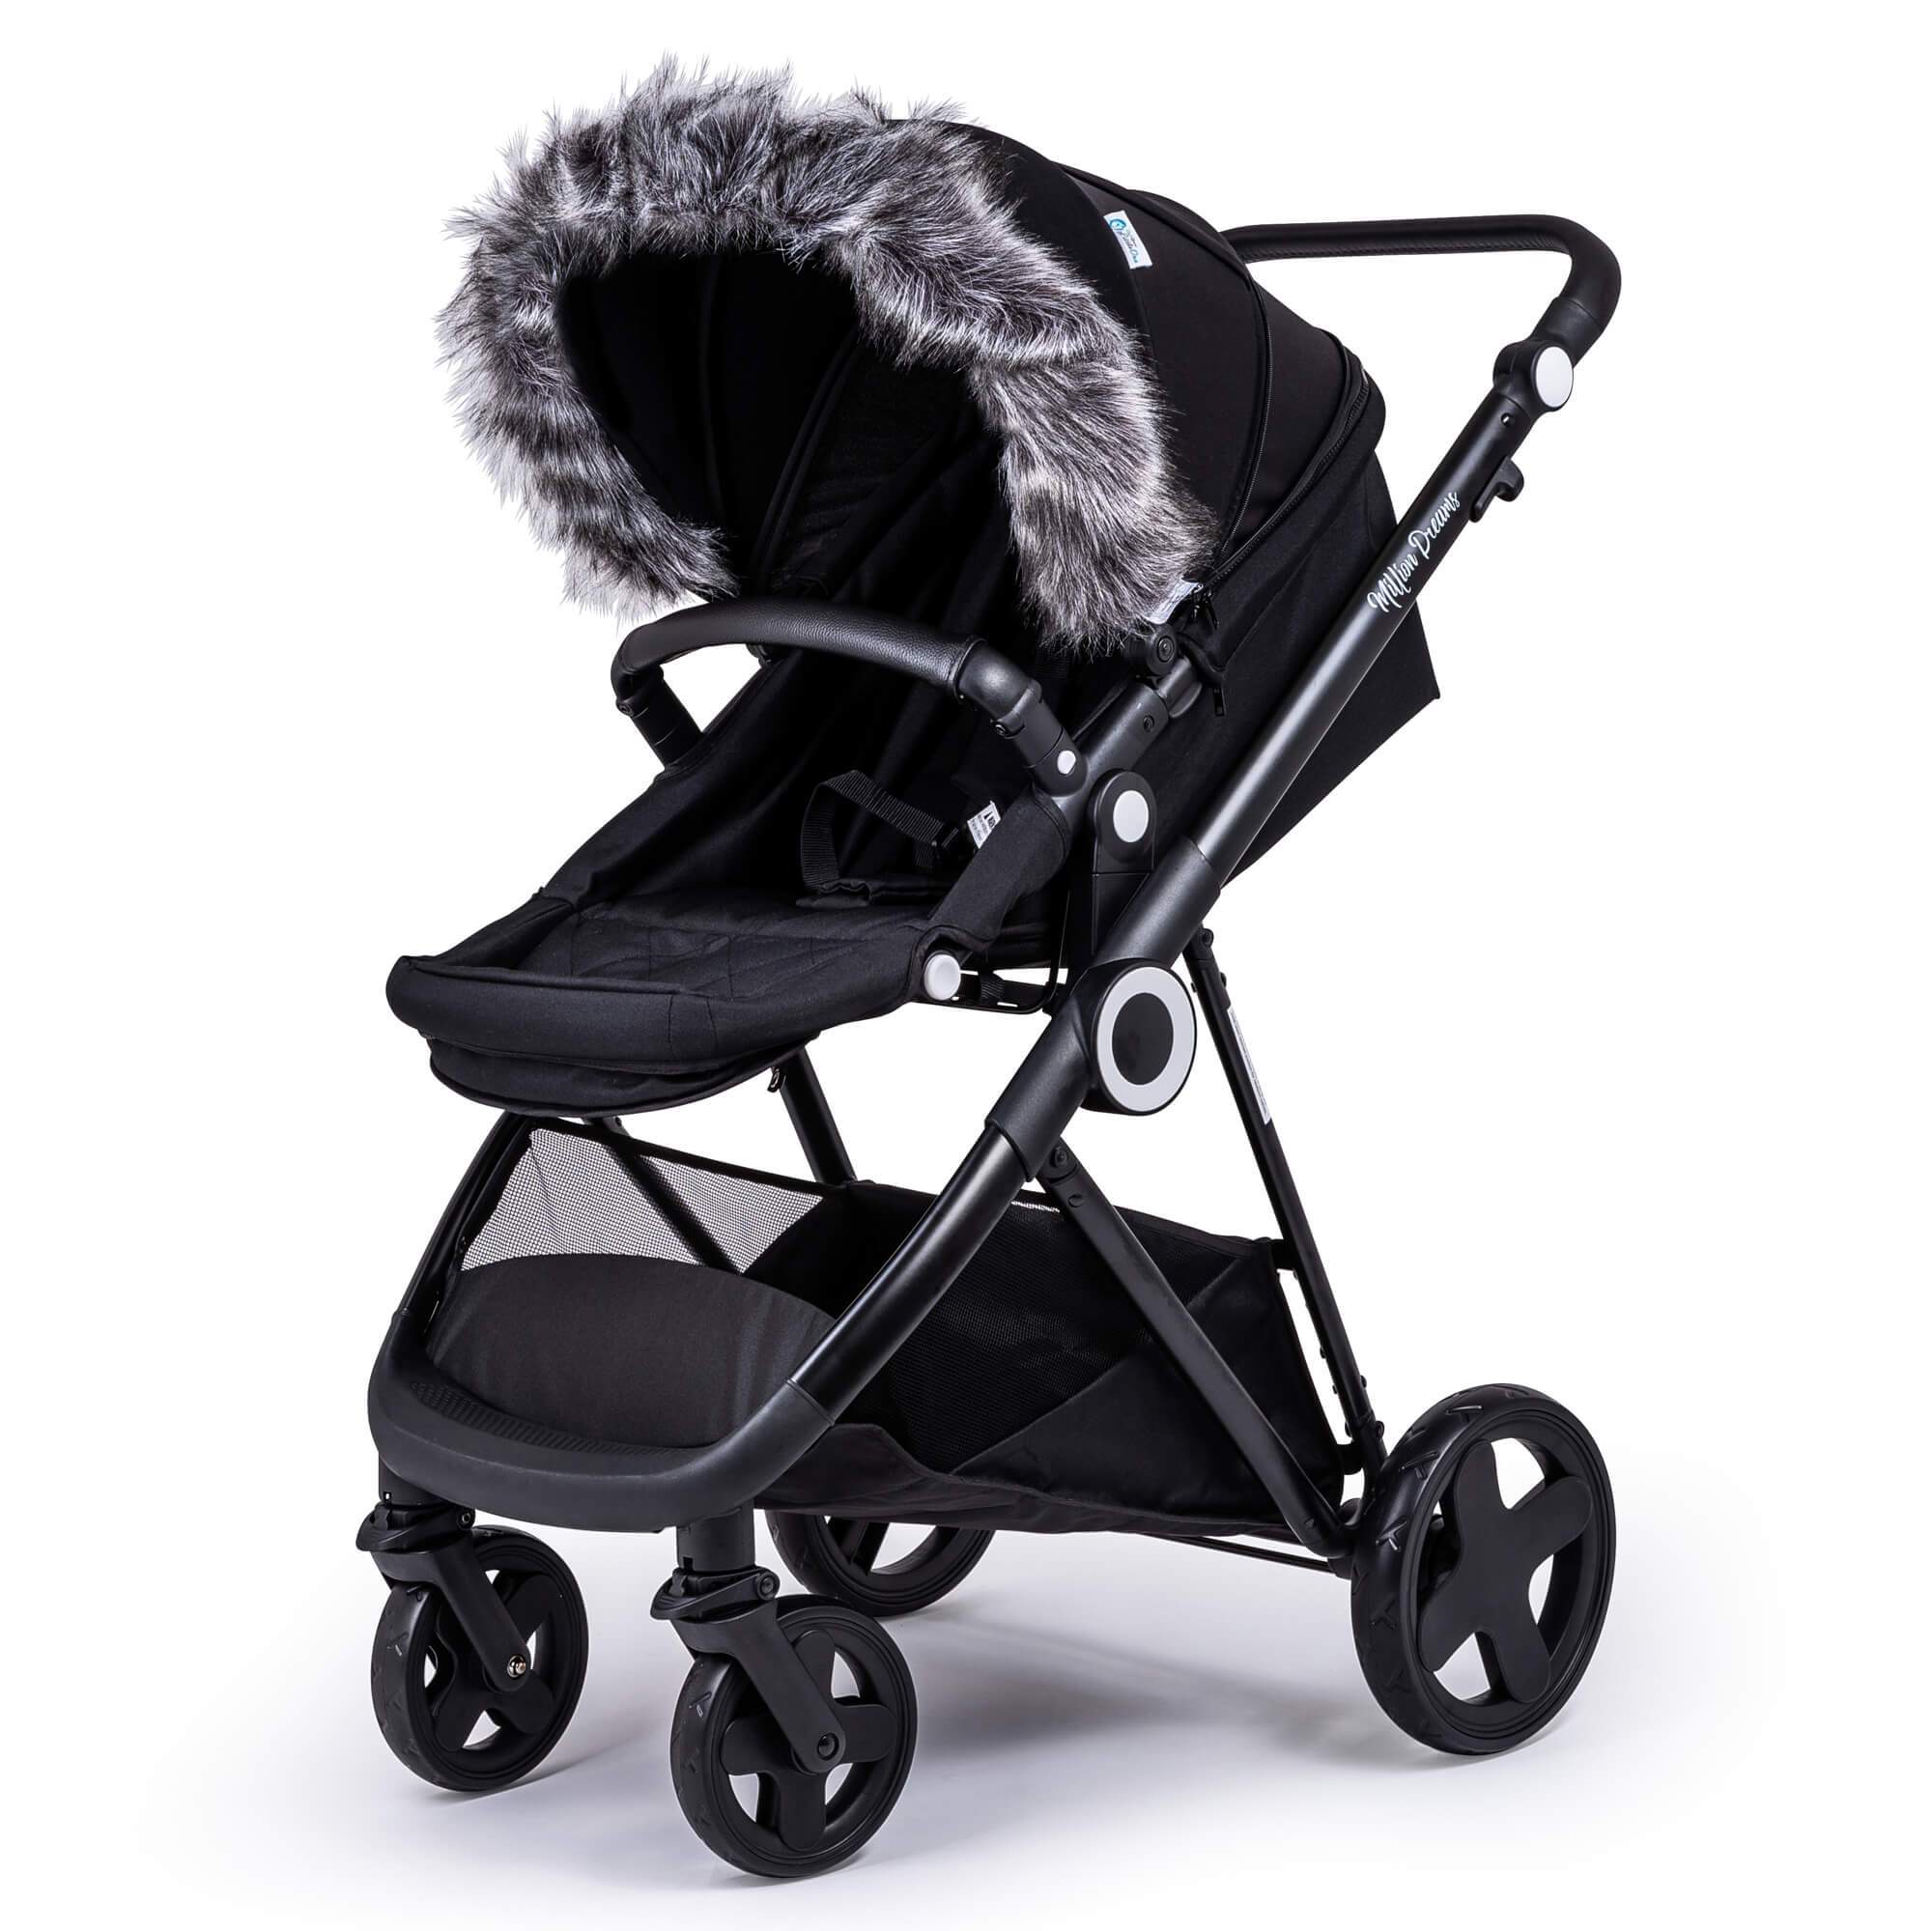 Pram Fur Hood Trim Attachment for Pushchair Compatible with Quax - Dark Grey / Fits All Models | For Your Little One